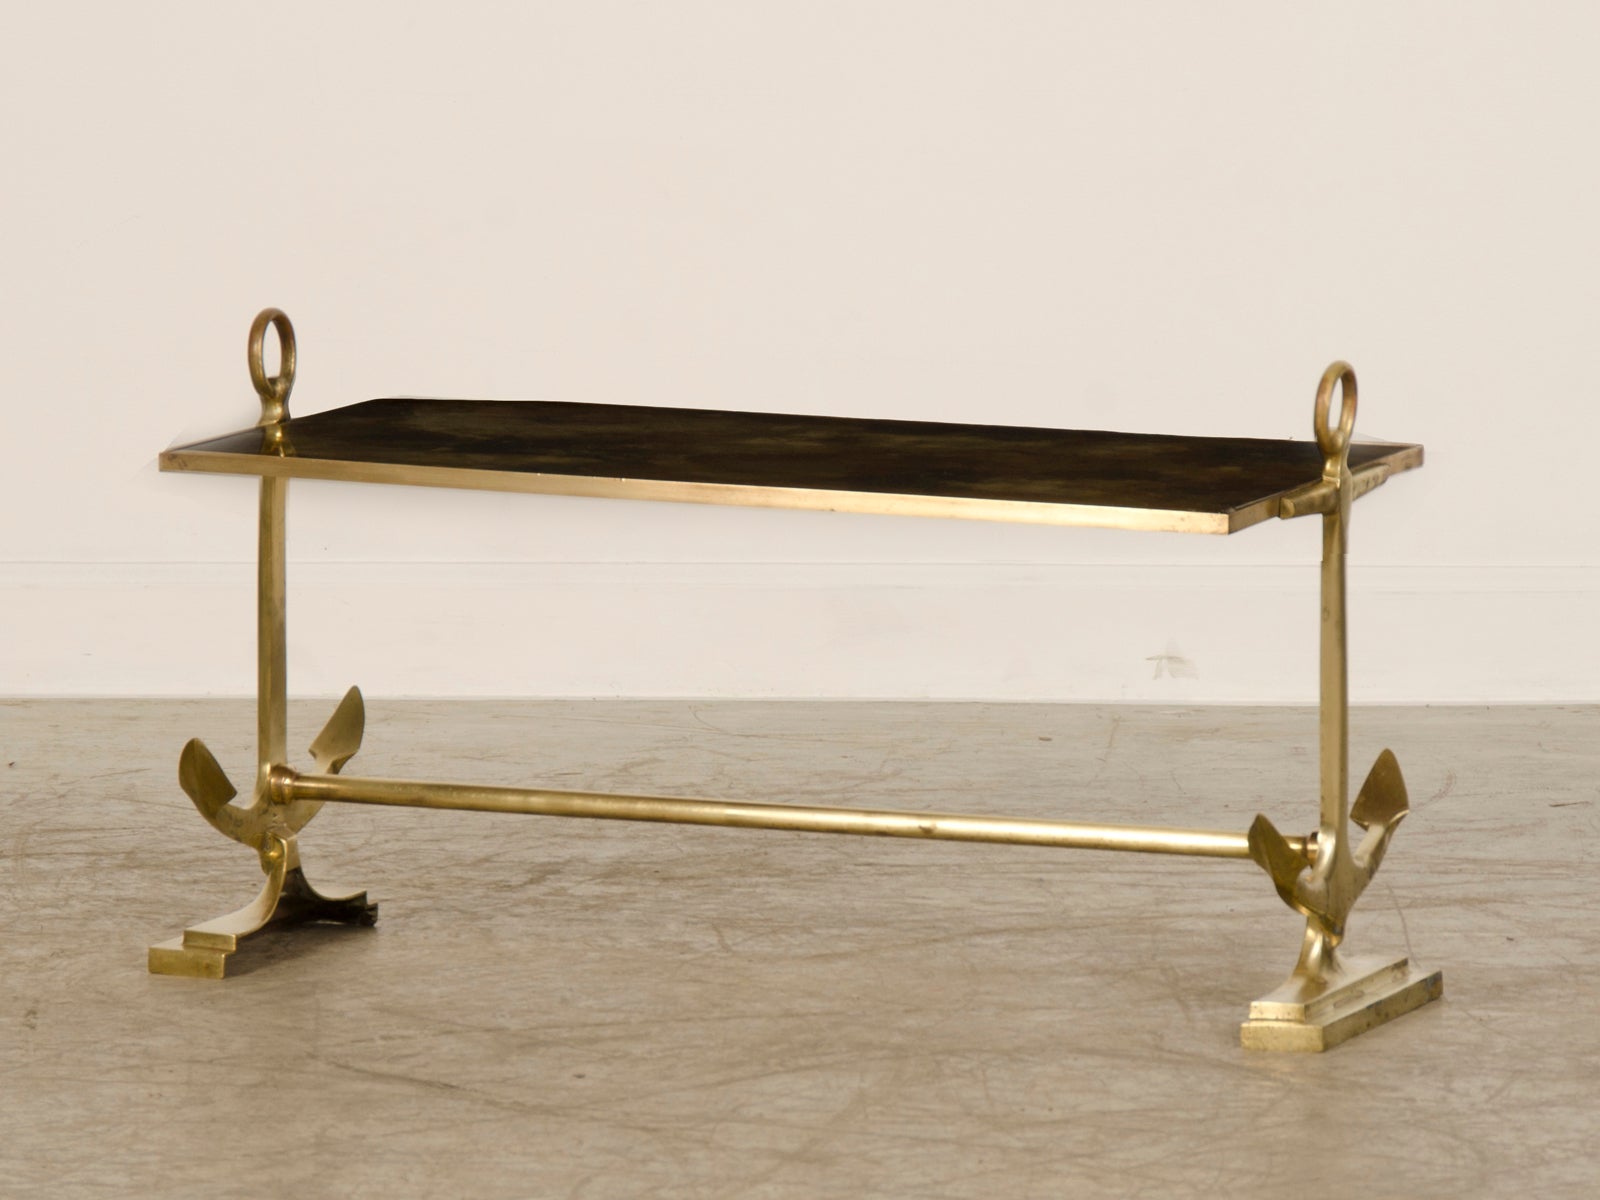 Nautical Theme Brass Coffee Table with Marbled Mirror Glass, France c.1930.